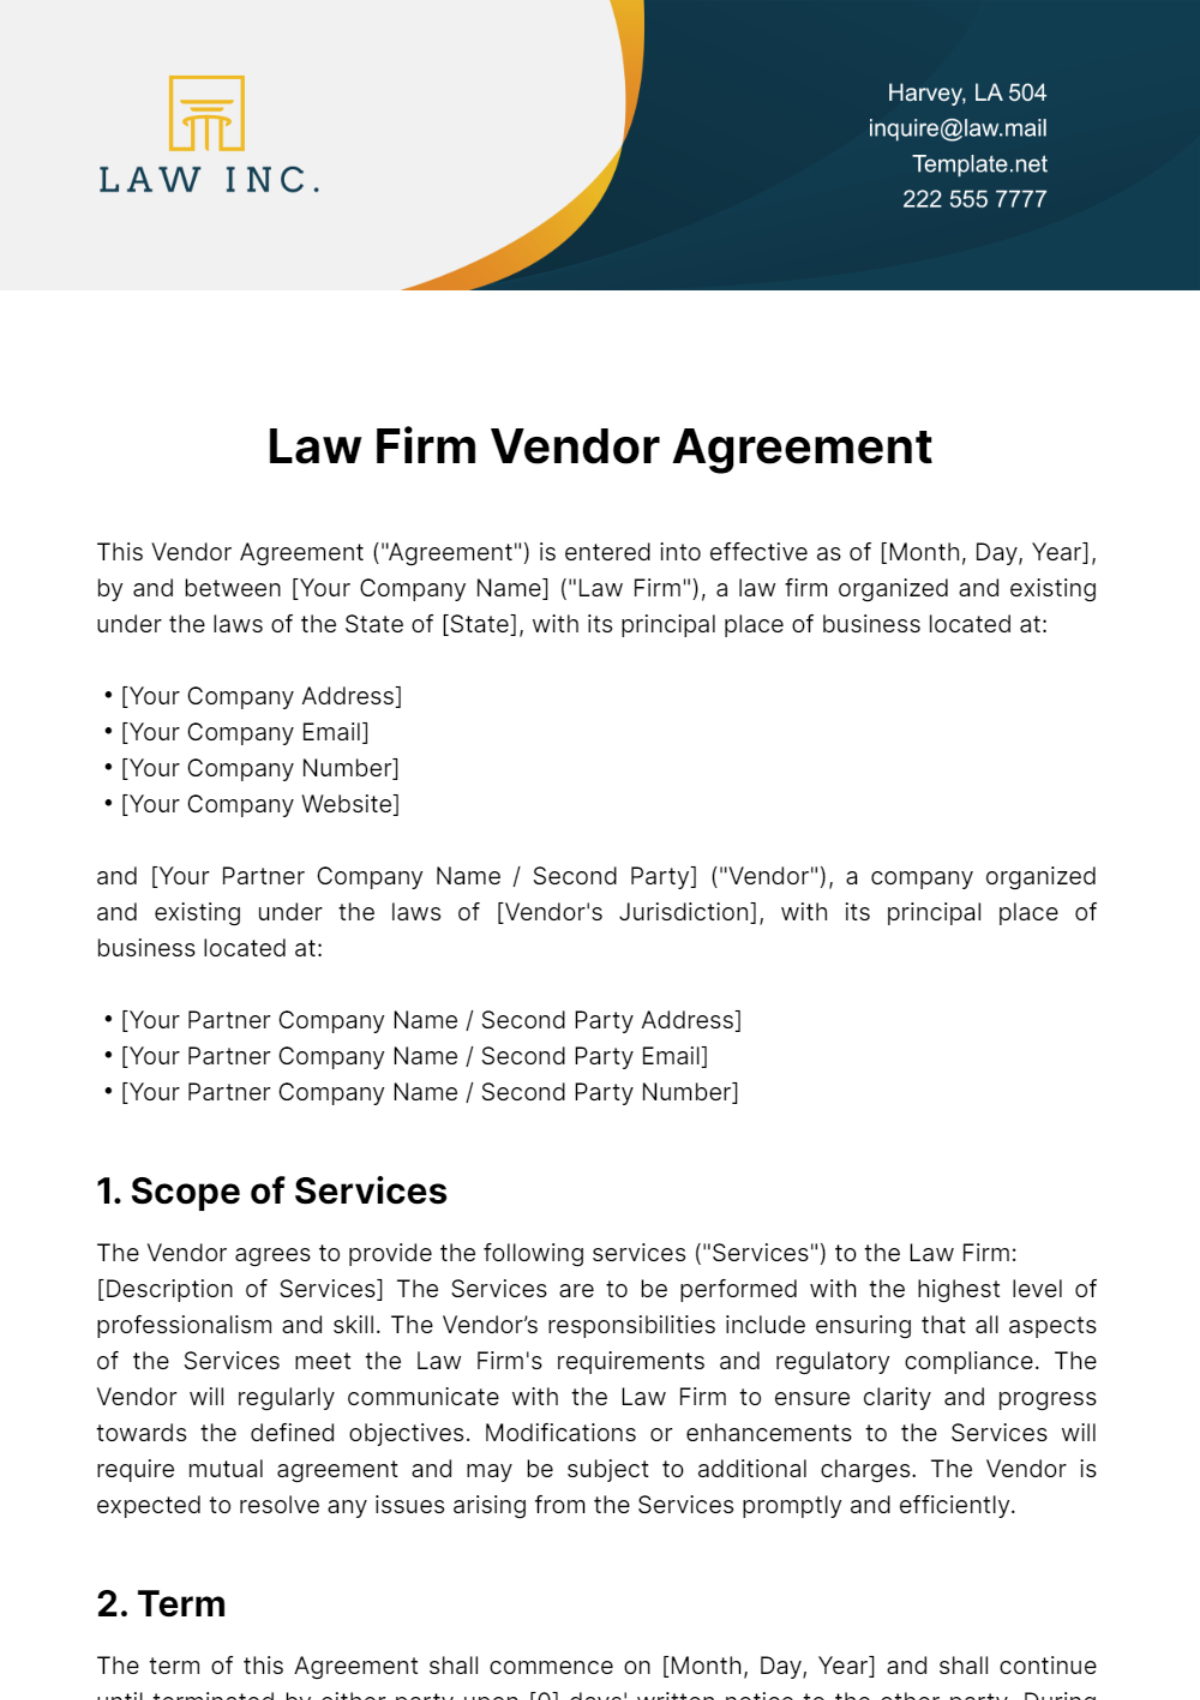 Law Firm Vendor Agreement Template